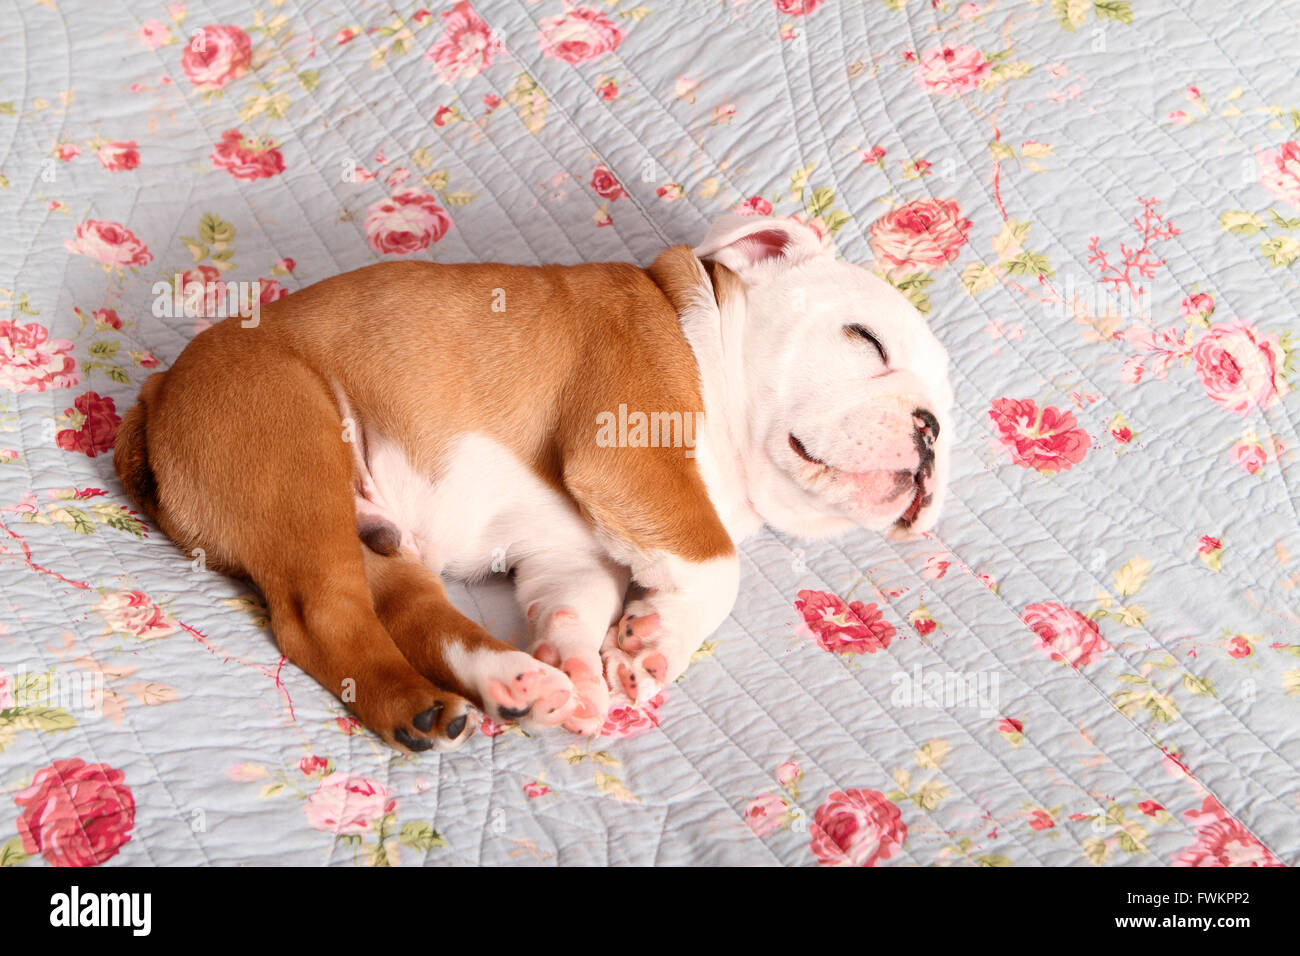 English Bulldog. Puppy (7 weeks old) sleeping on a blue blanket with rose flower print. Germany Stock Photo